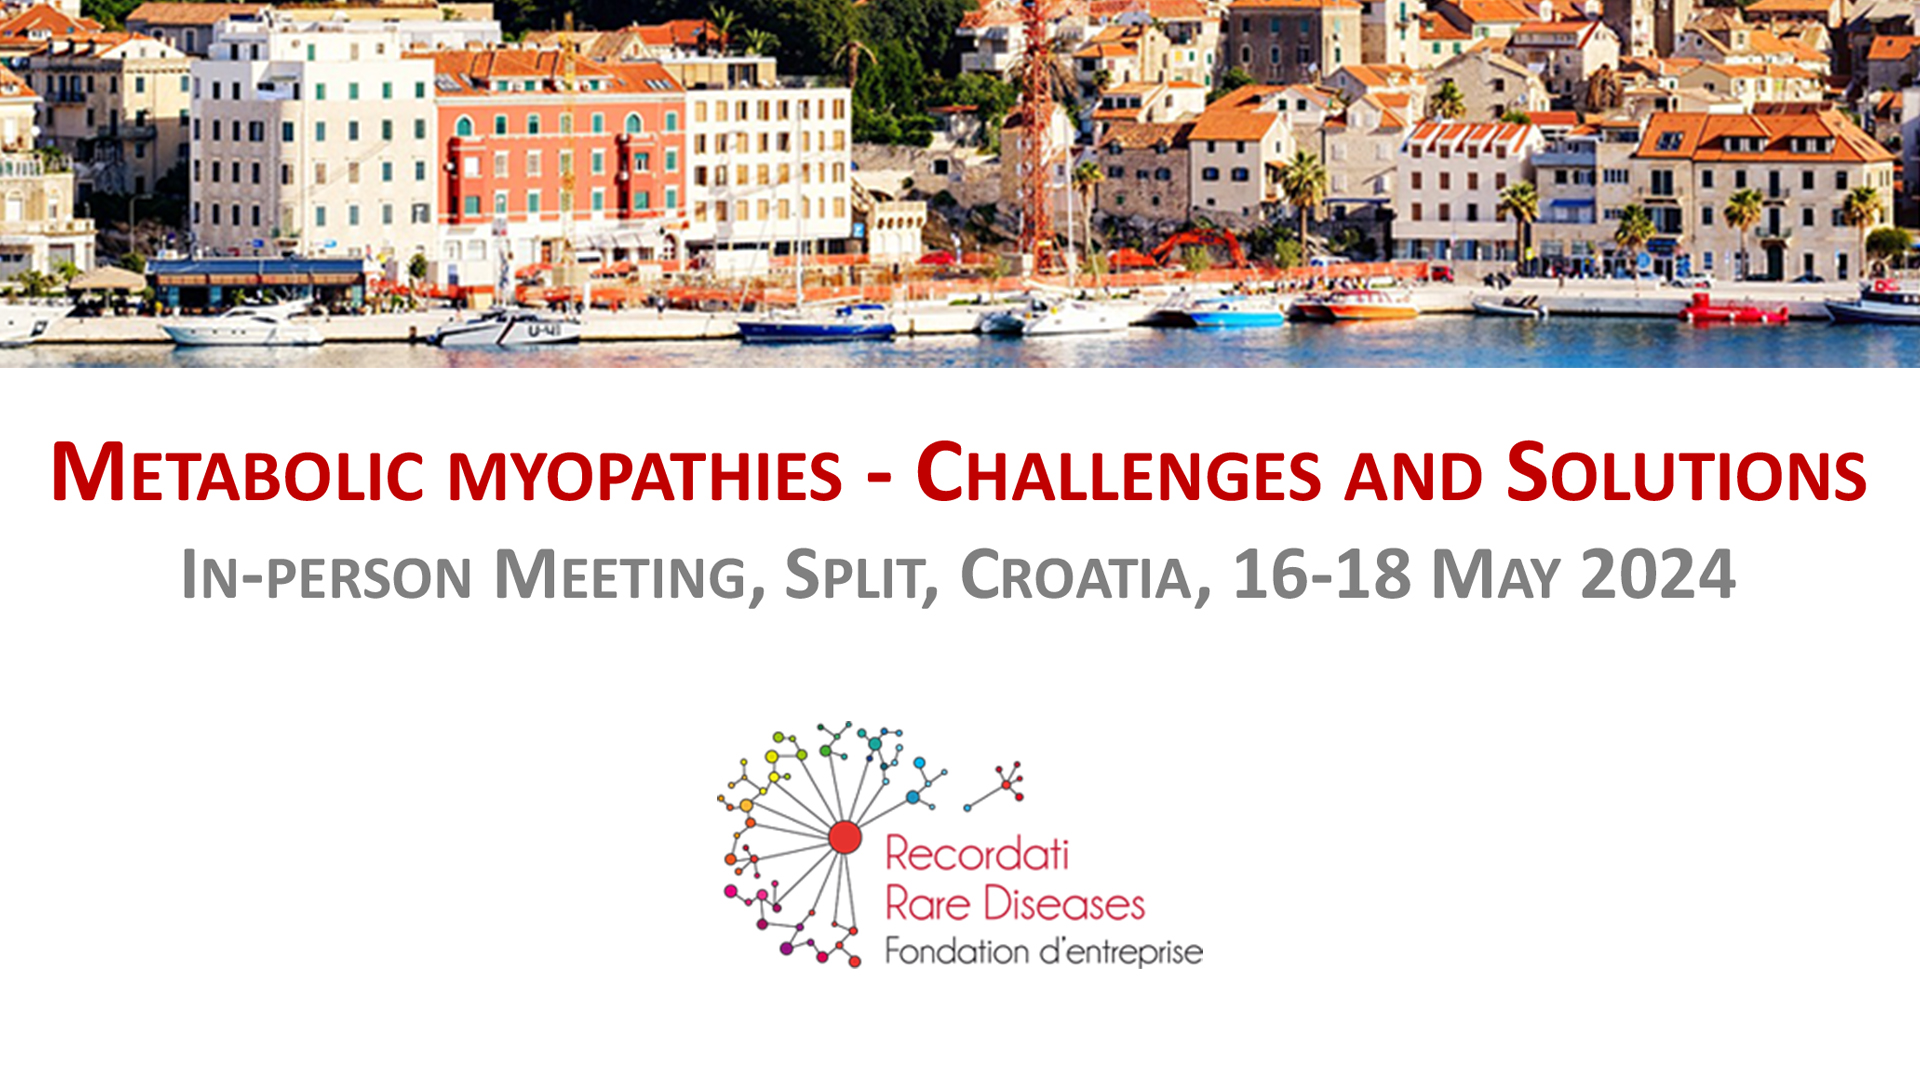 METABOLIC MYOPATHIES – CHALLENGES AND SOLUTIONS